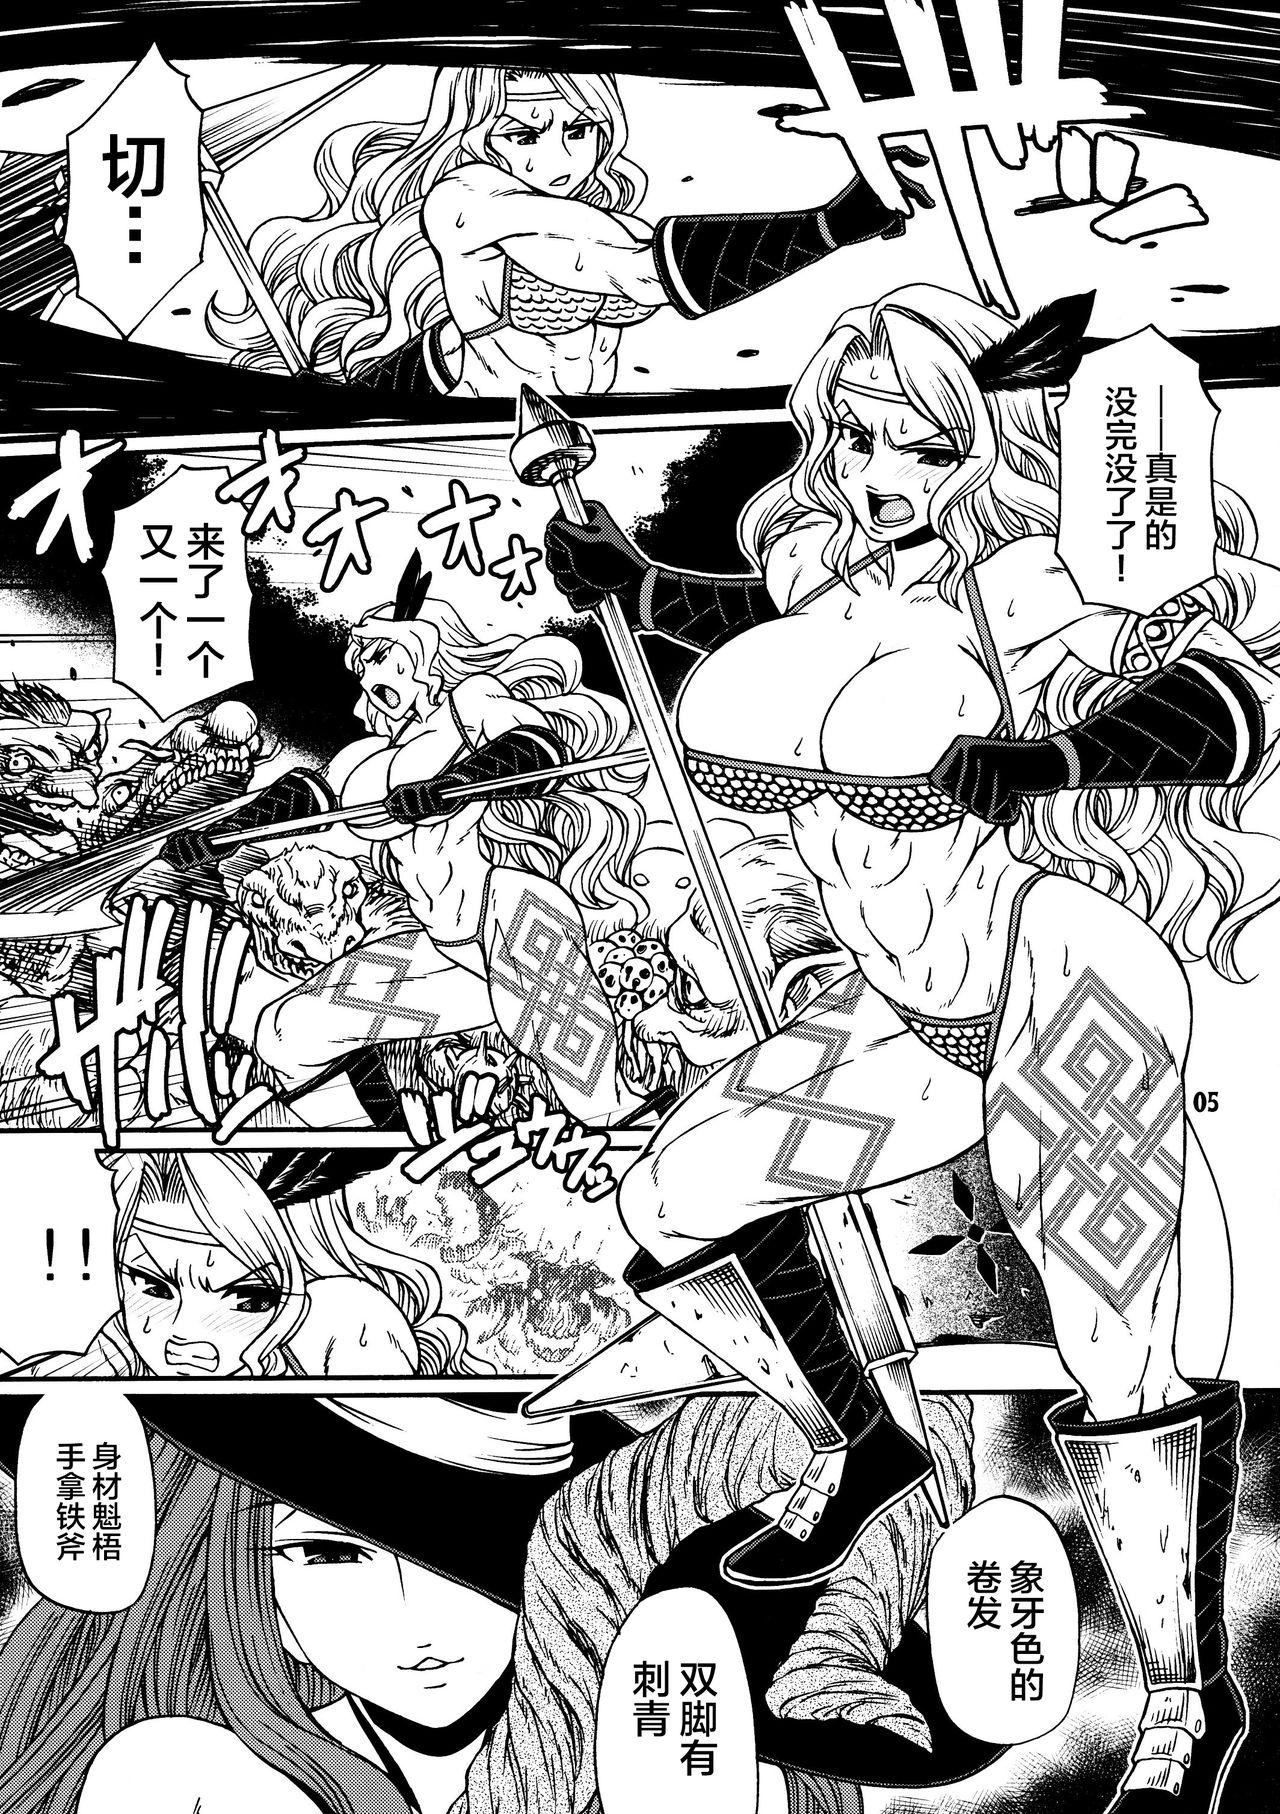 Follada PARTY HARD - Dragons crown Public Nudity - Page 4